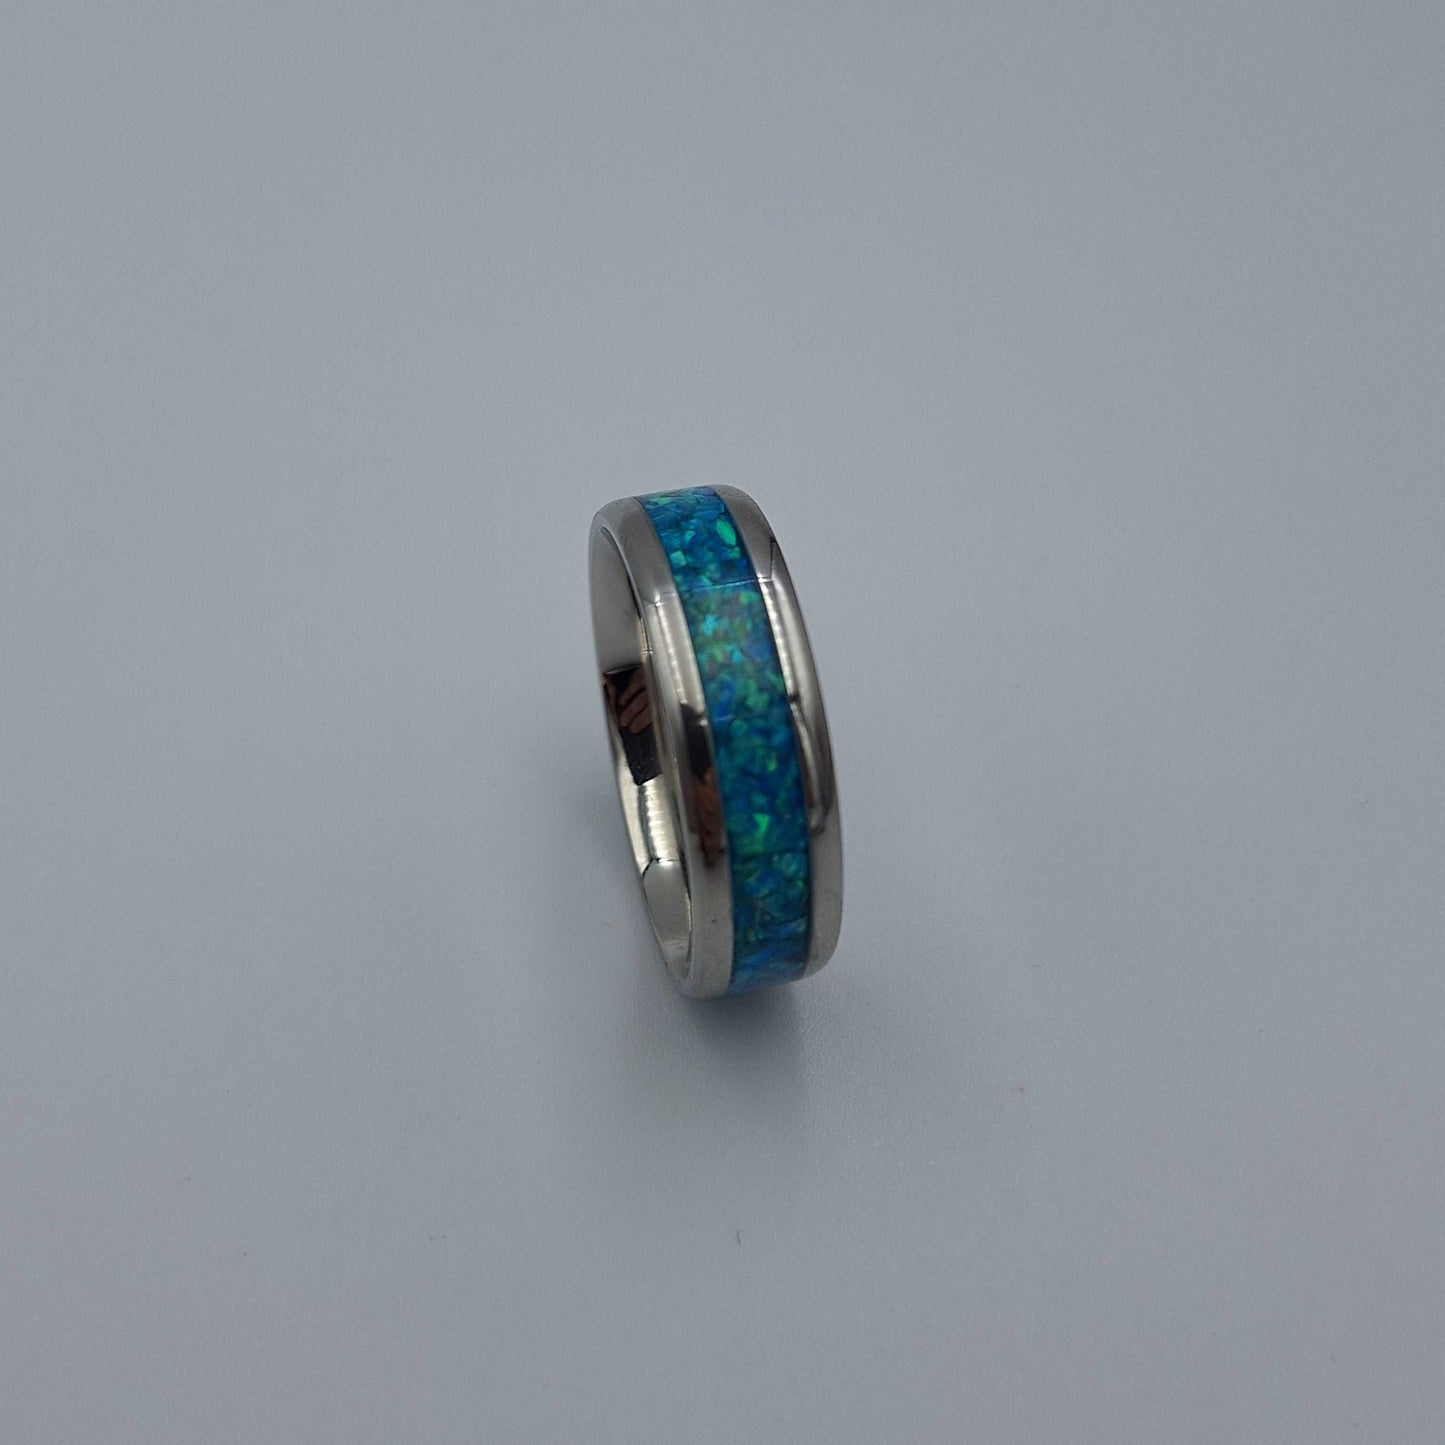 Stainless Steel 8mm Ring With Crushed Opals - Size 15